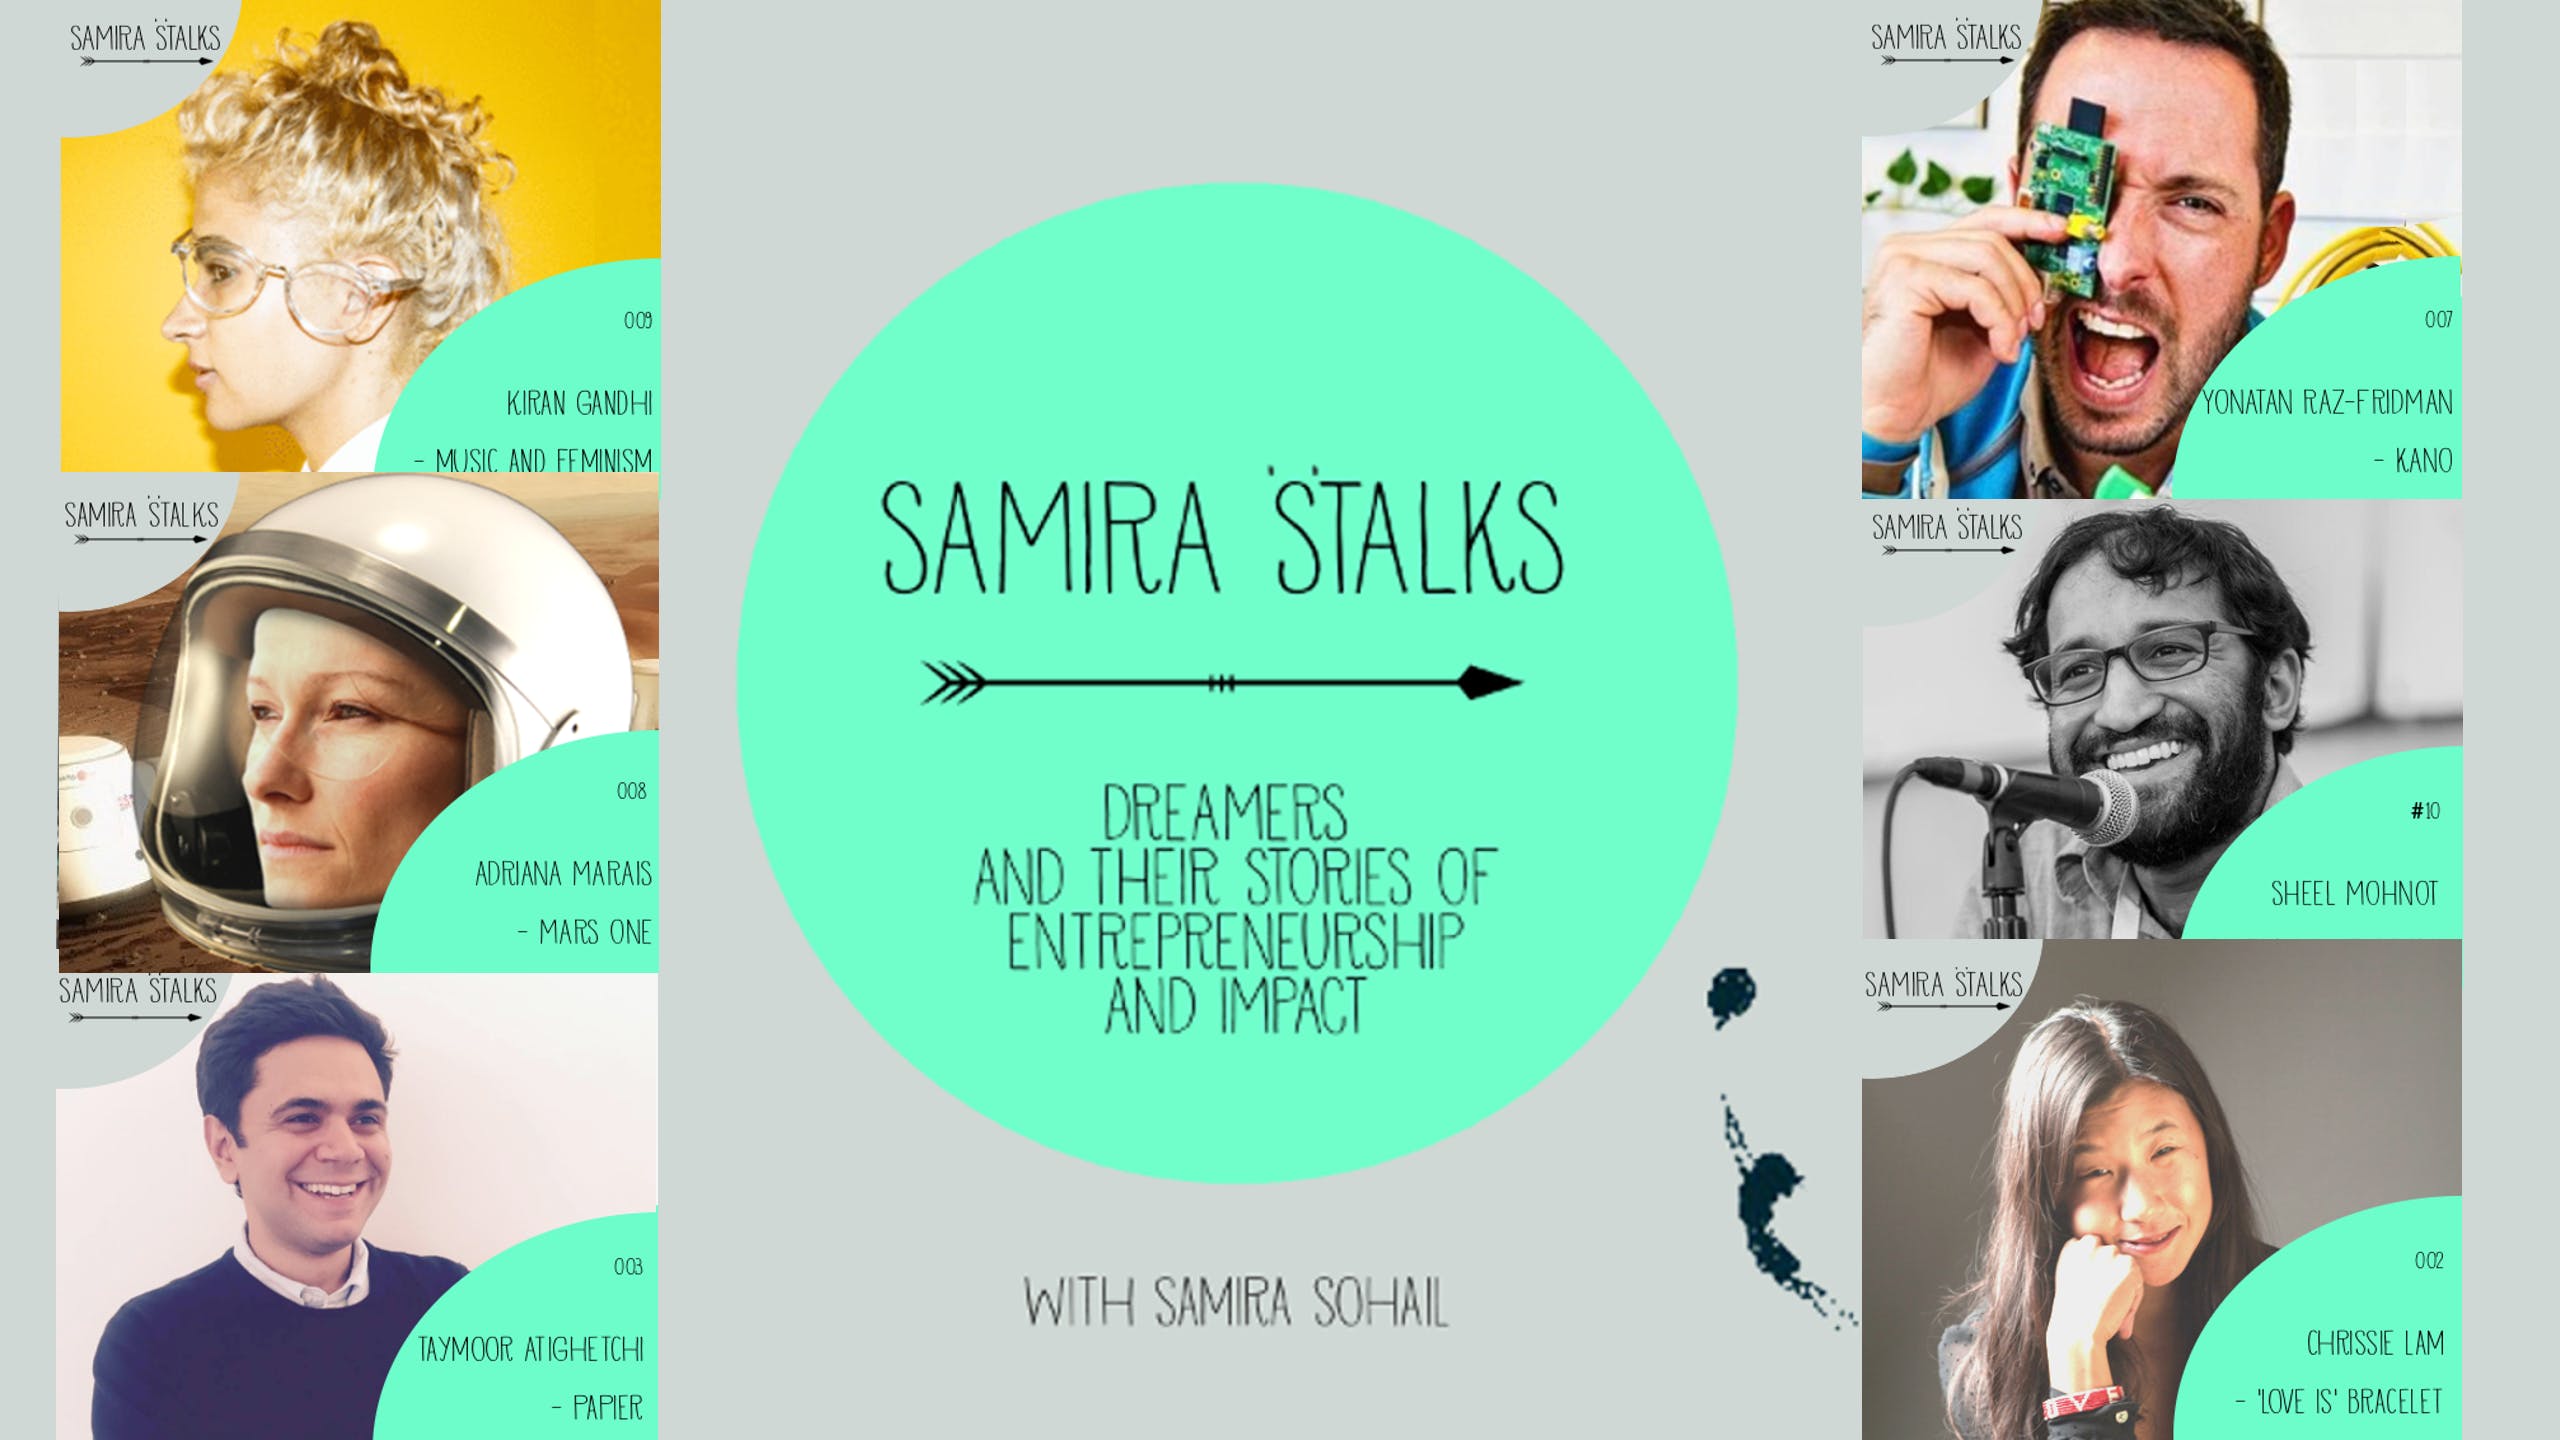 Samira Stalks: Kano – a computer kit teaching kids to code without them knowing it! media 1